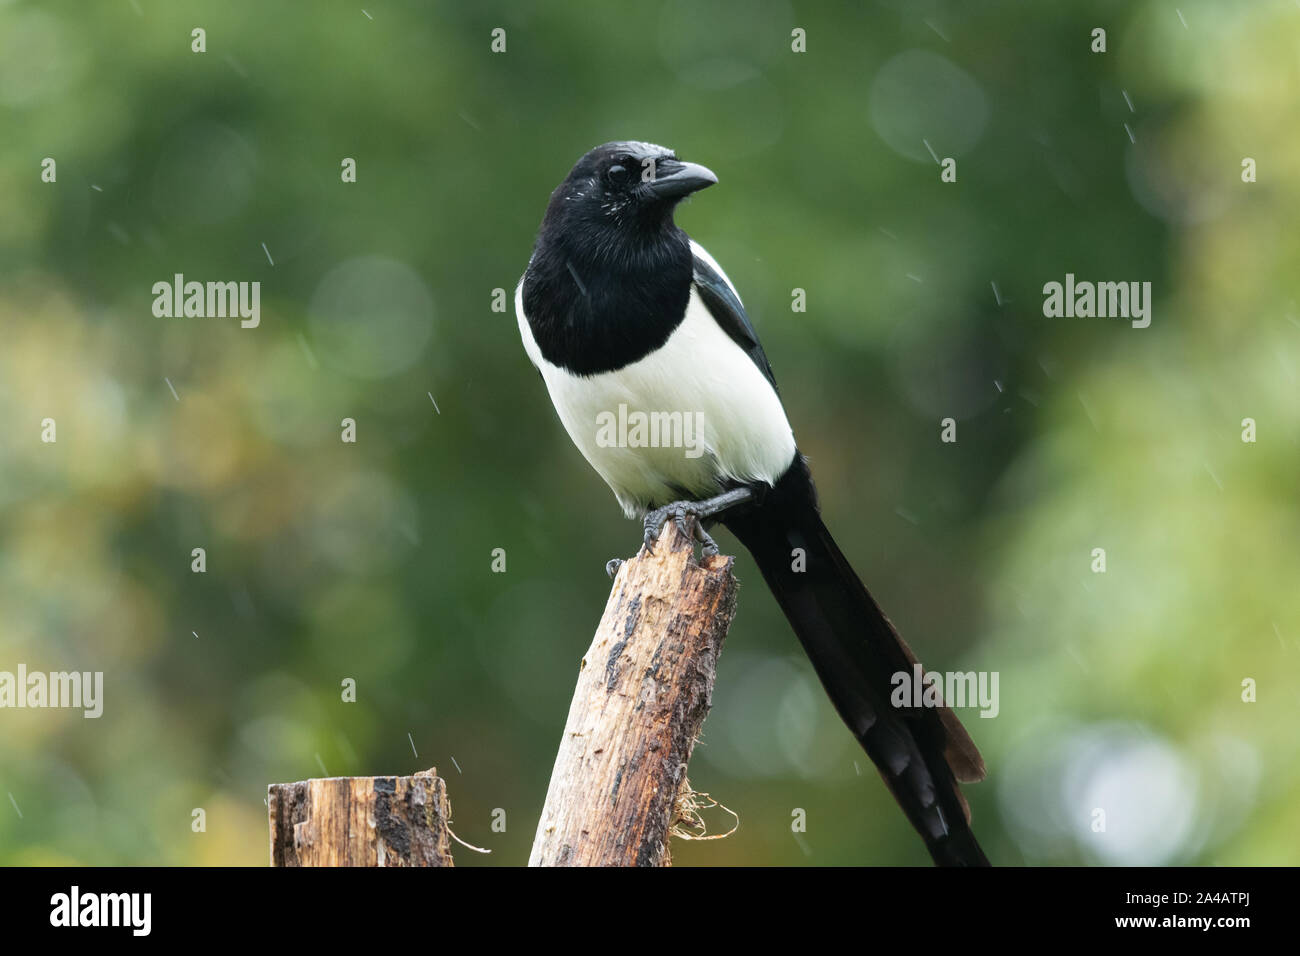 Magpie (Pica pica), a bird in the corvidae family, on a perch in the rain, UK Stock Photo